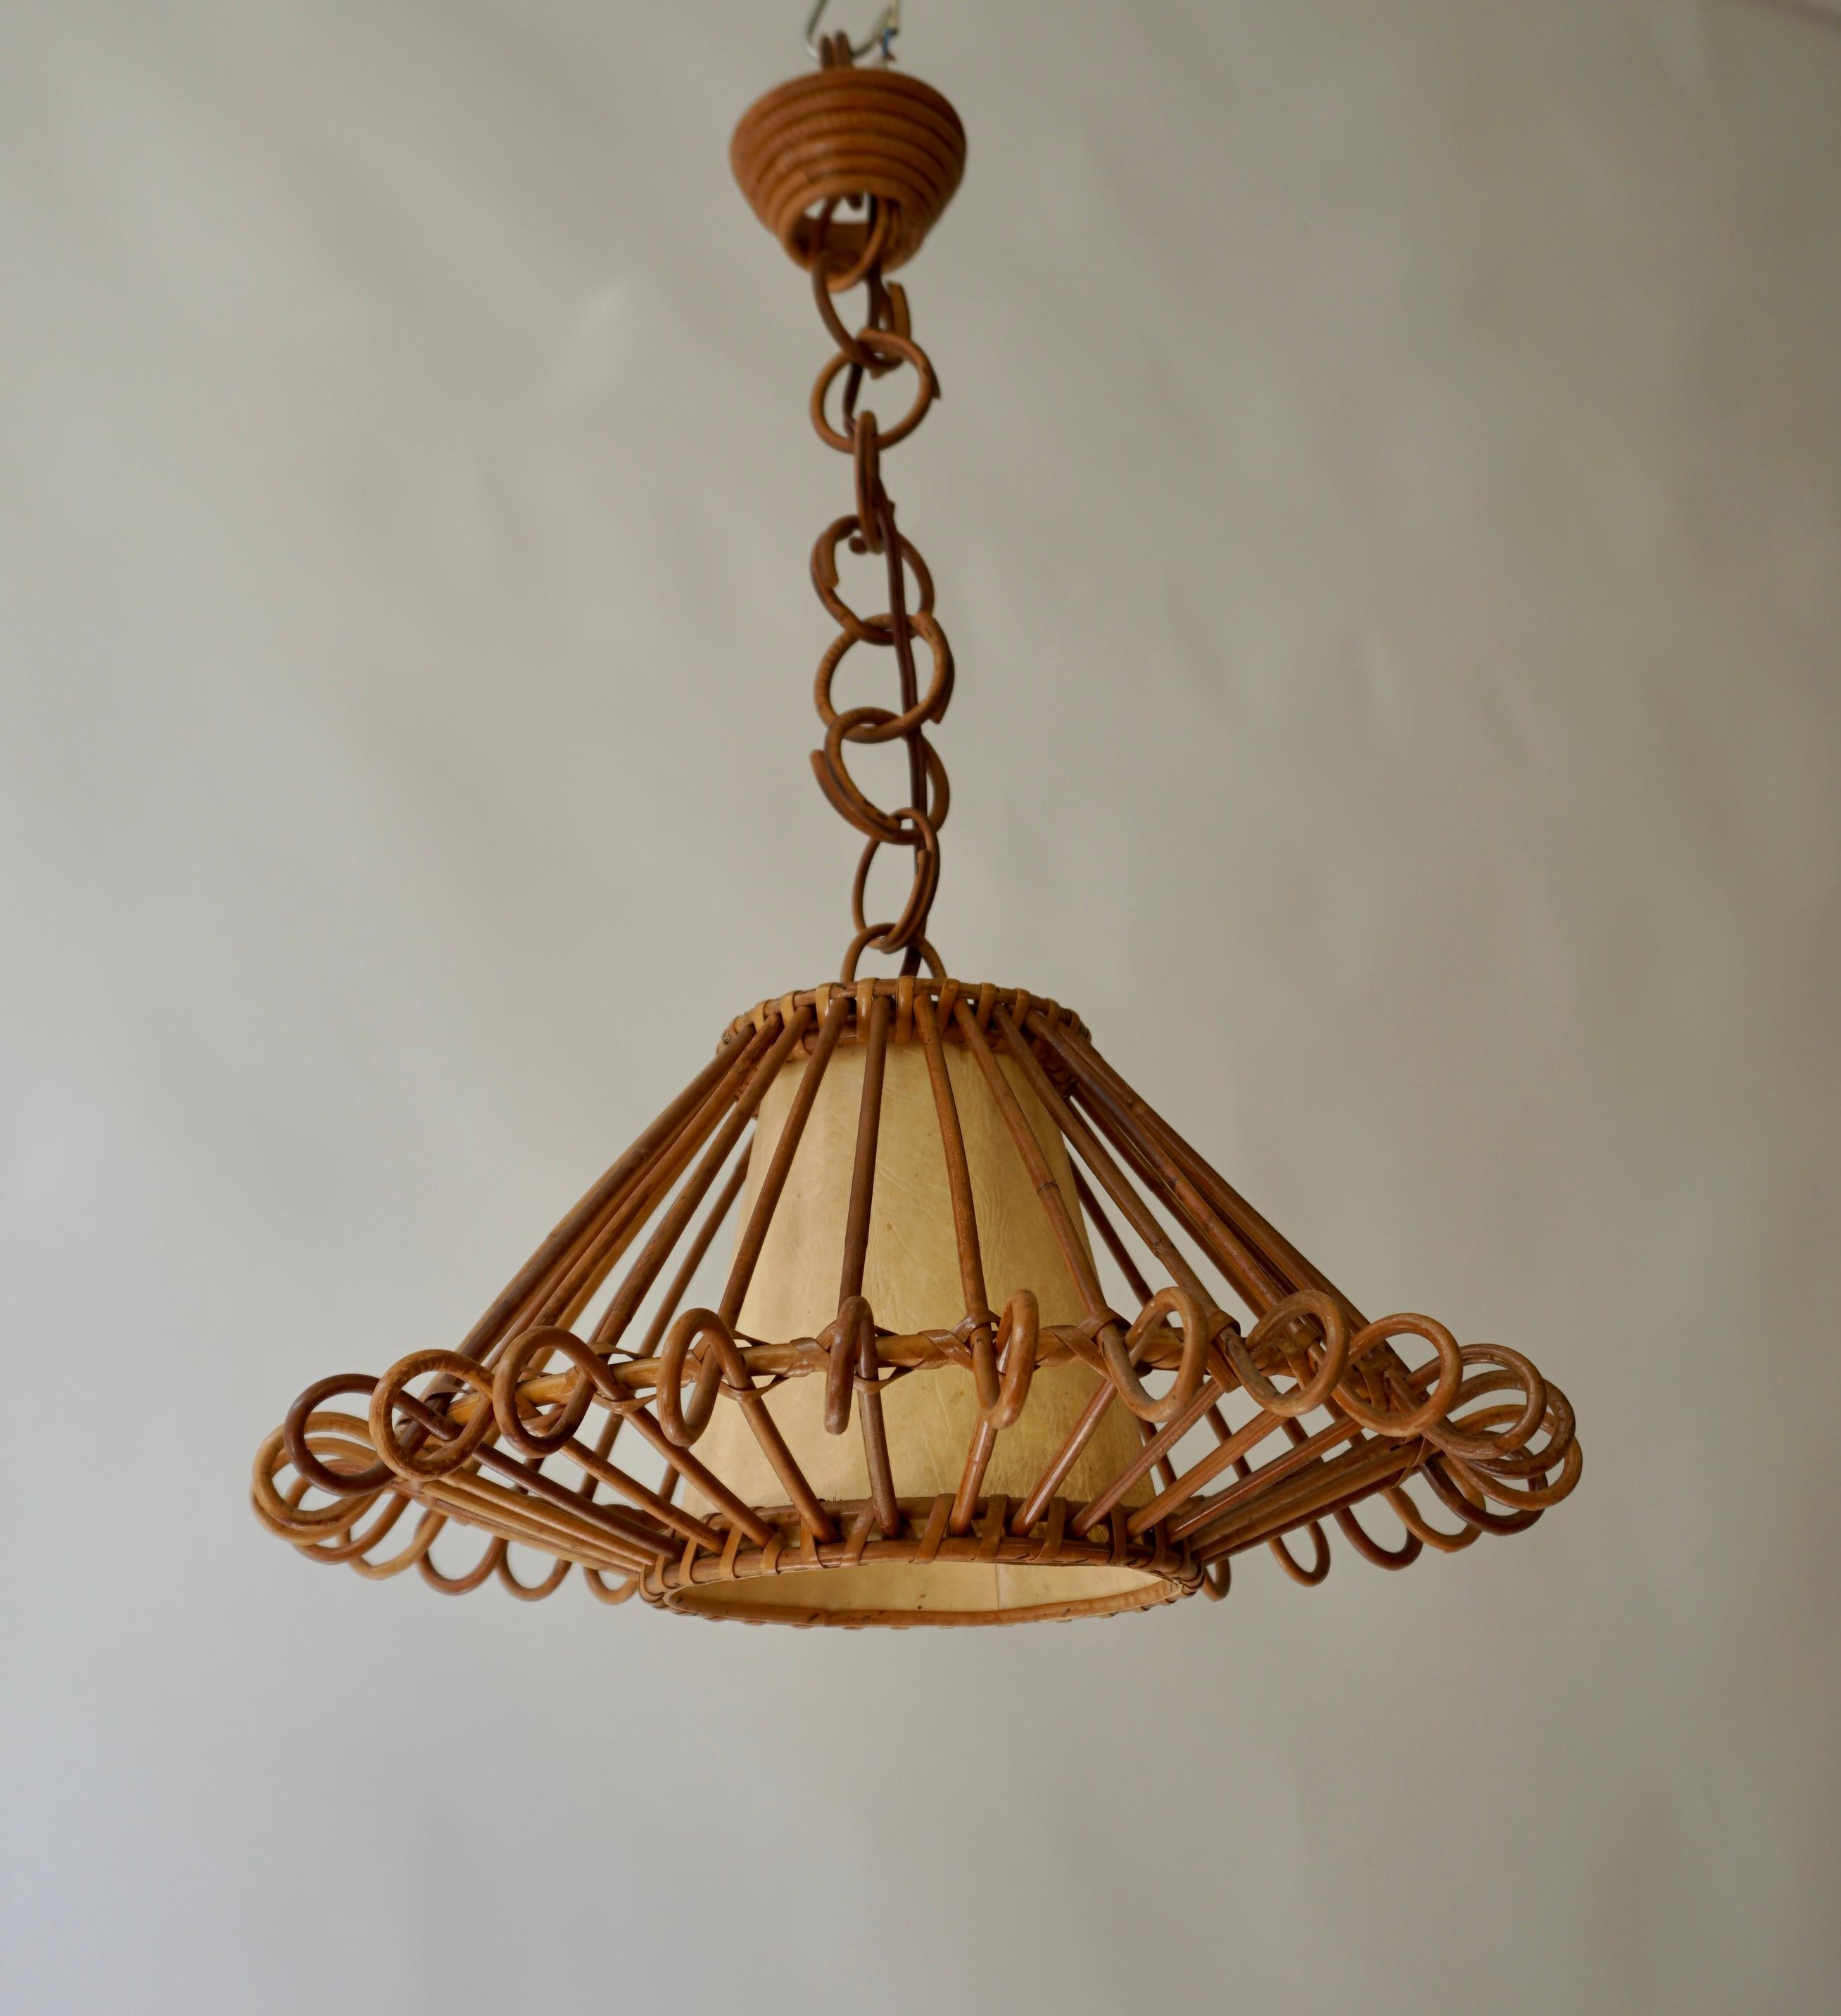 Bamboo and rattan french pendant lamp. Mid-century round piece with an interior parchment paper shade with a sort of linen texture.

French Modernist Rattan Pendant Lamp or Lantern. France, 1950s. This eye-catching rattan chandelier features a